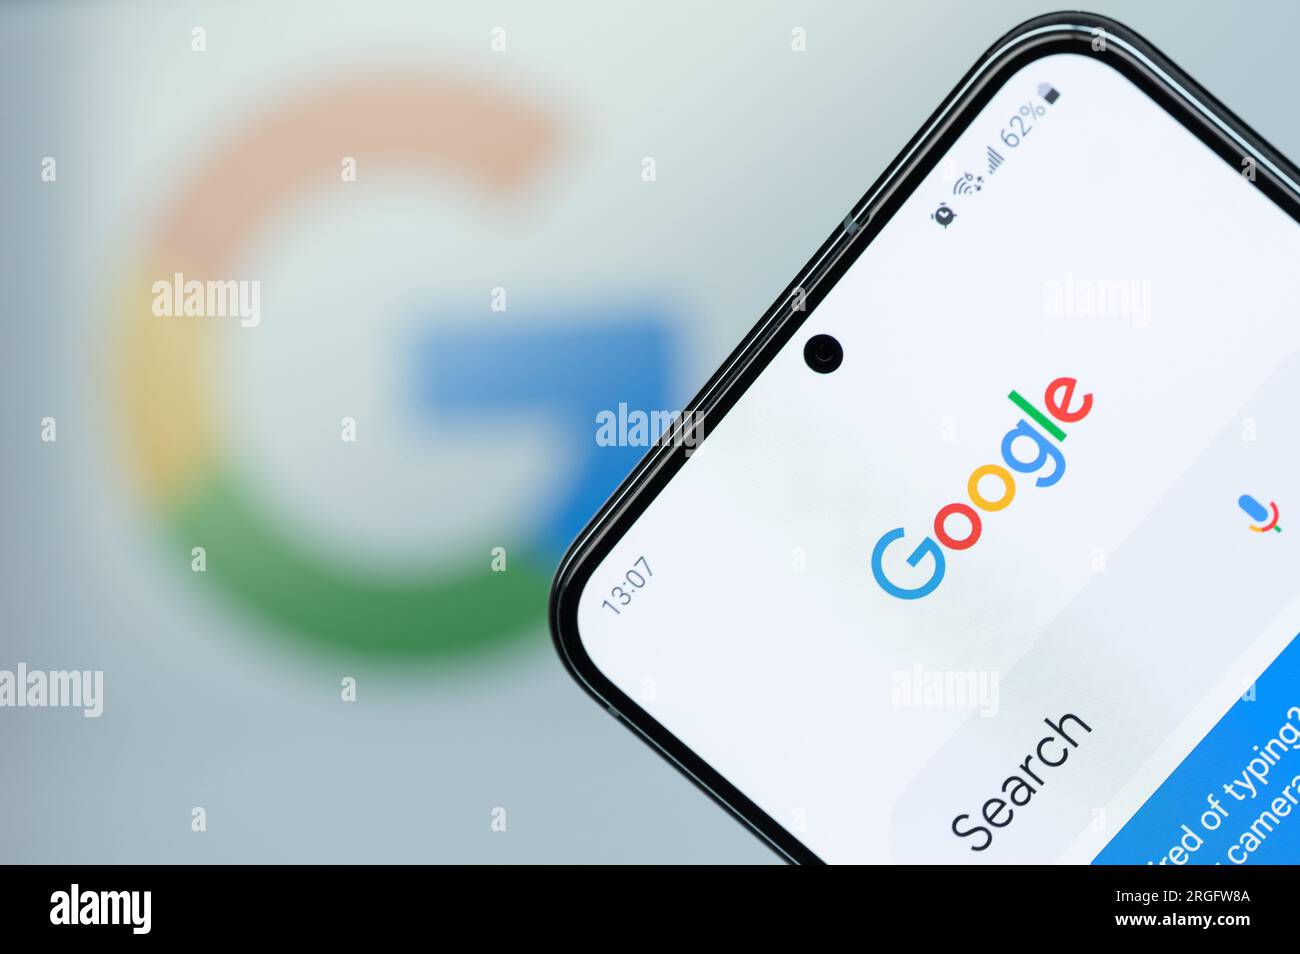 New York, USA - August 6, 2023: Open Google search app on smartphone screen close up with blurred logo background Stock Photo